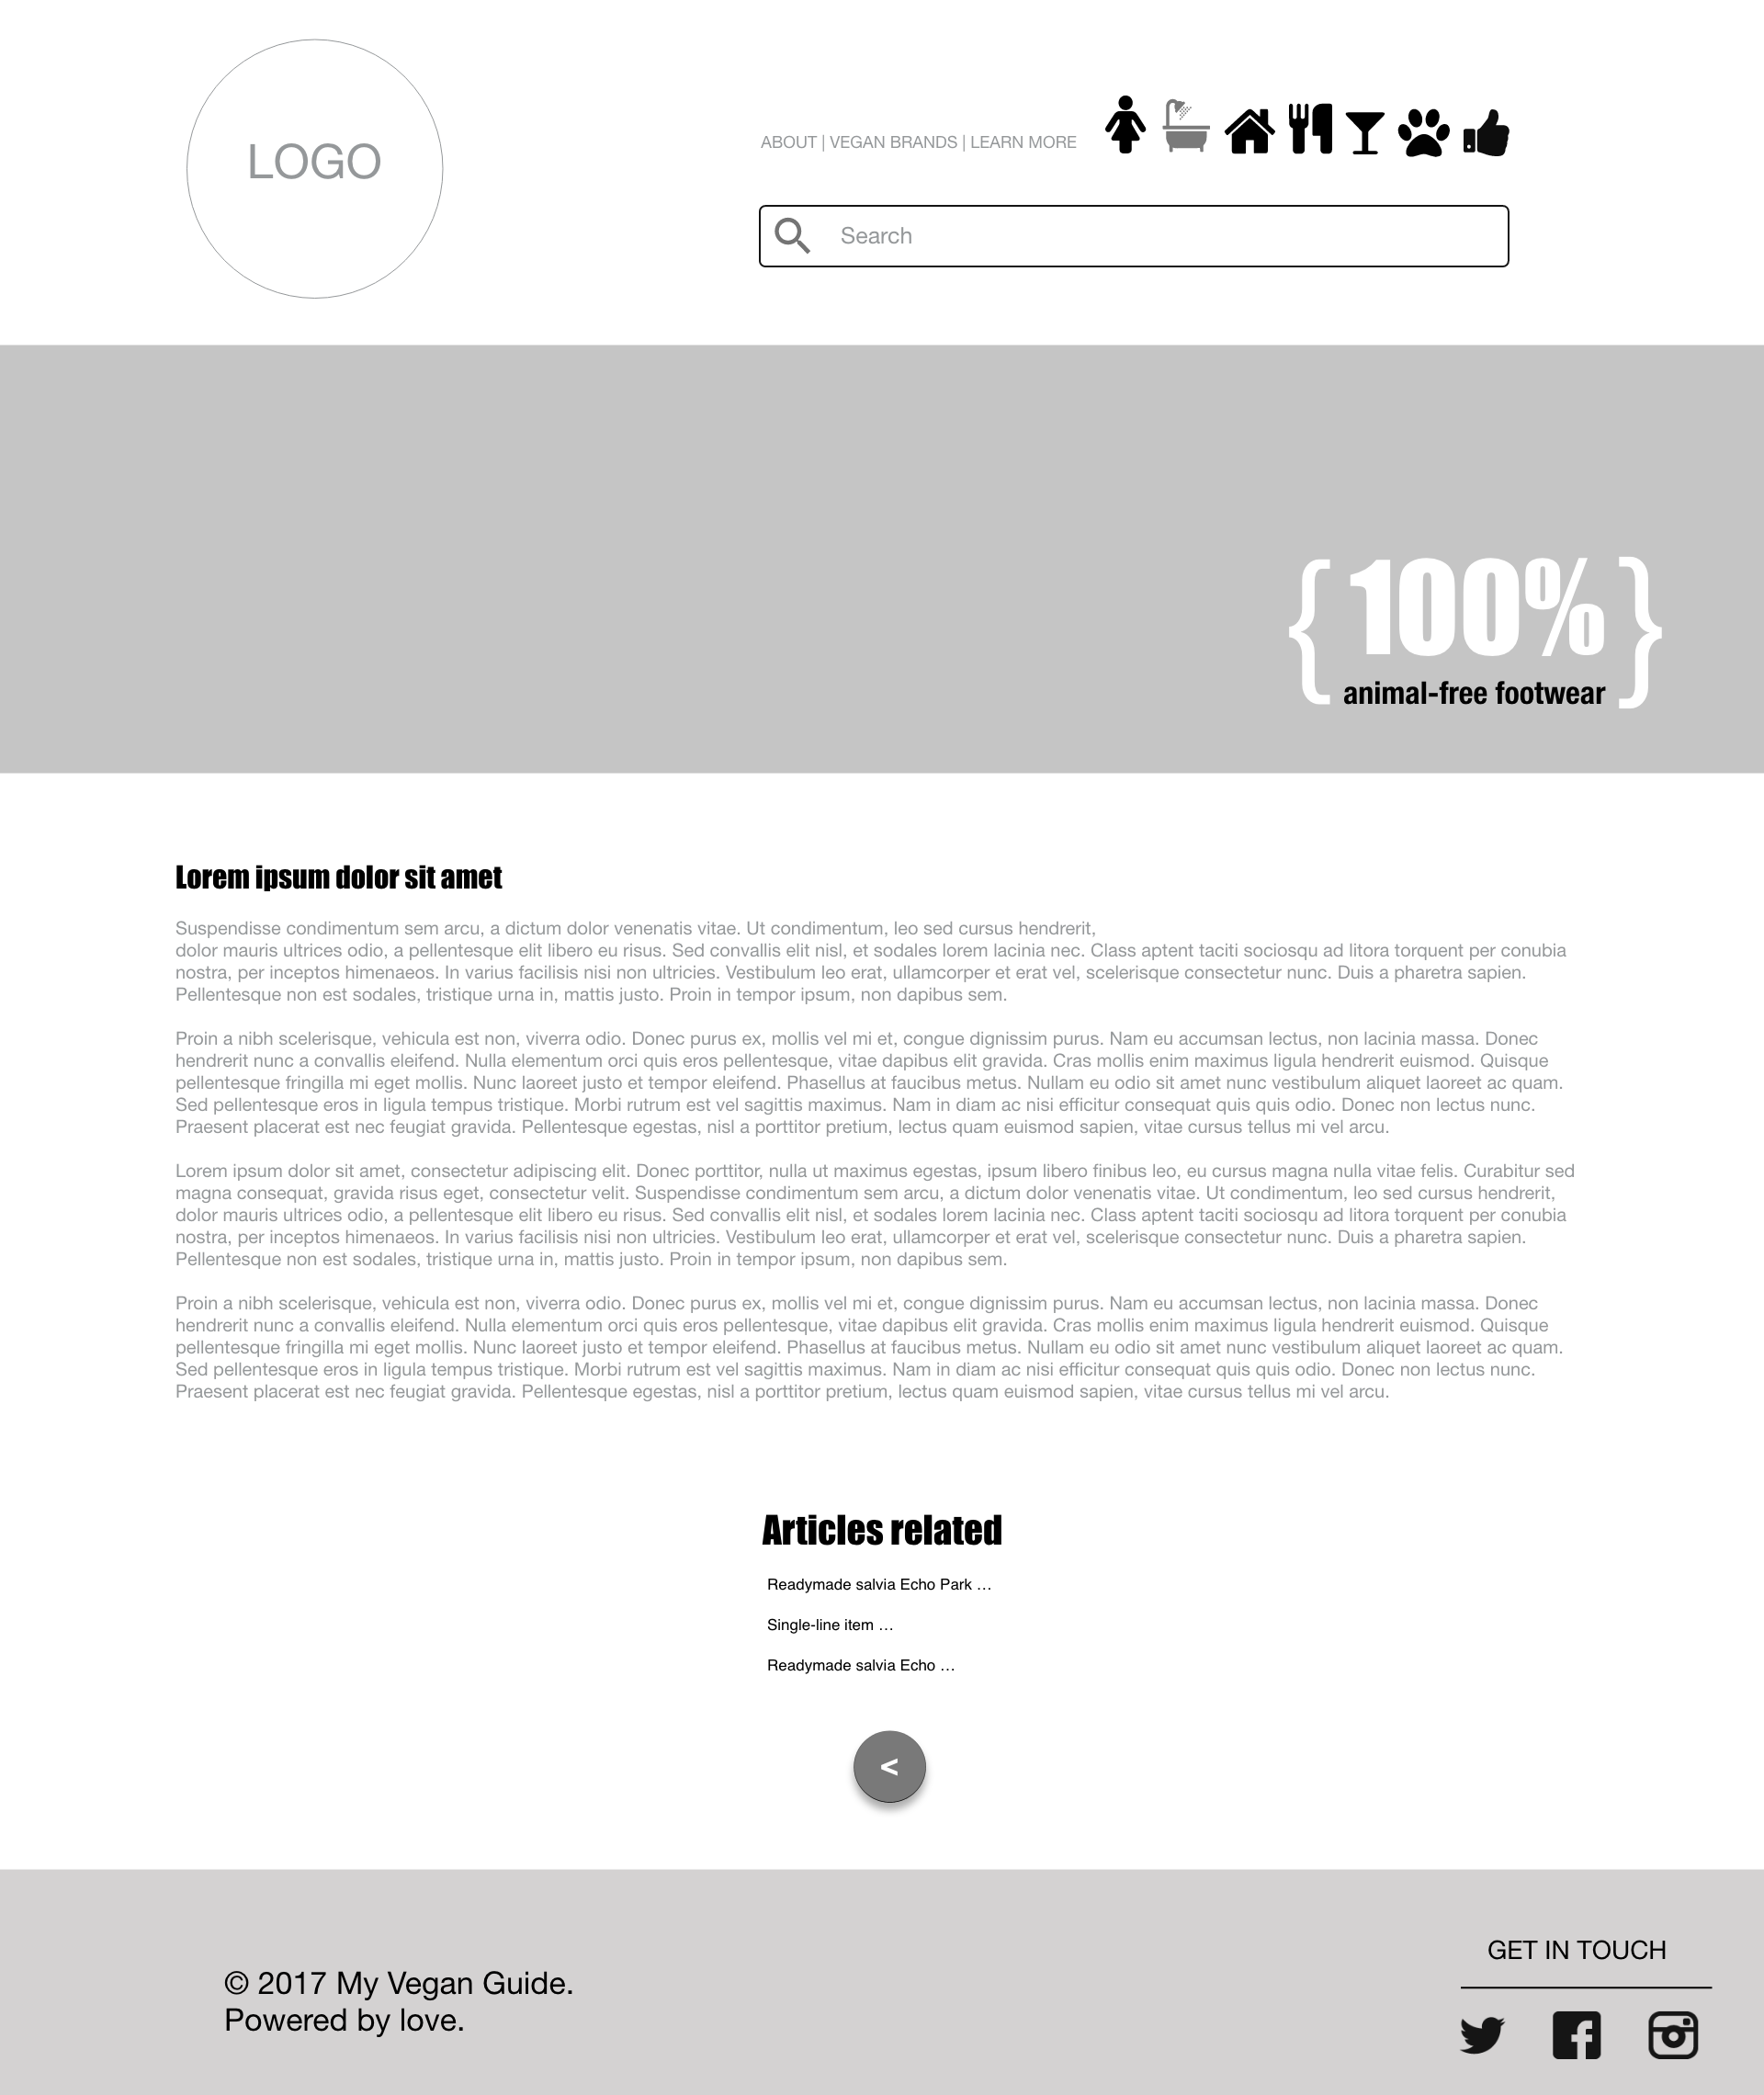 Article page layout